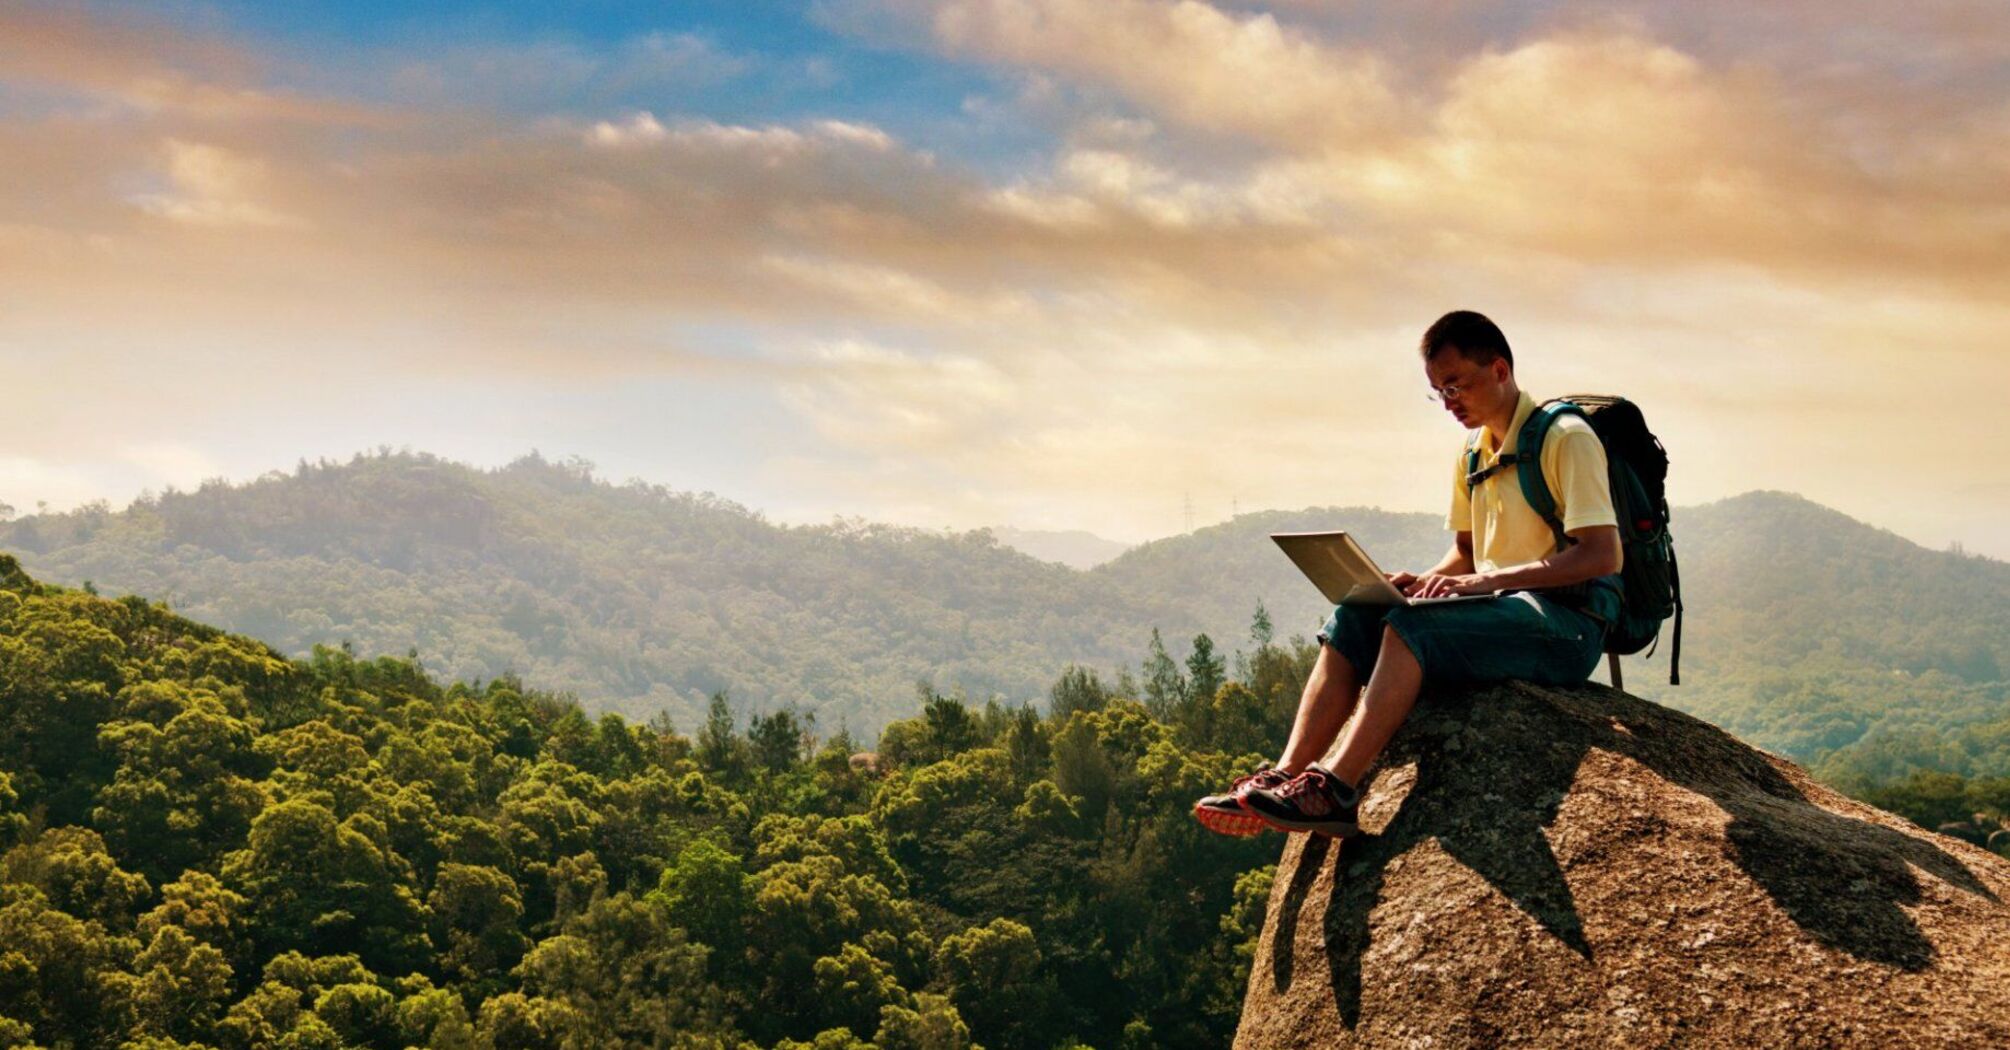 Digital Nomads, Remote Workers, and Freelancers: Who Are They?